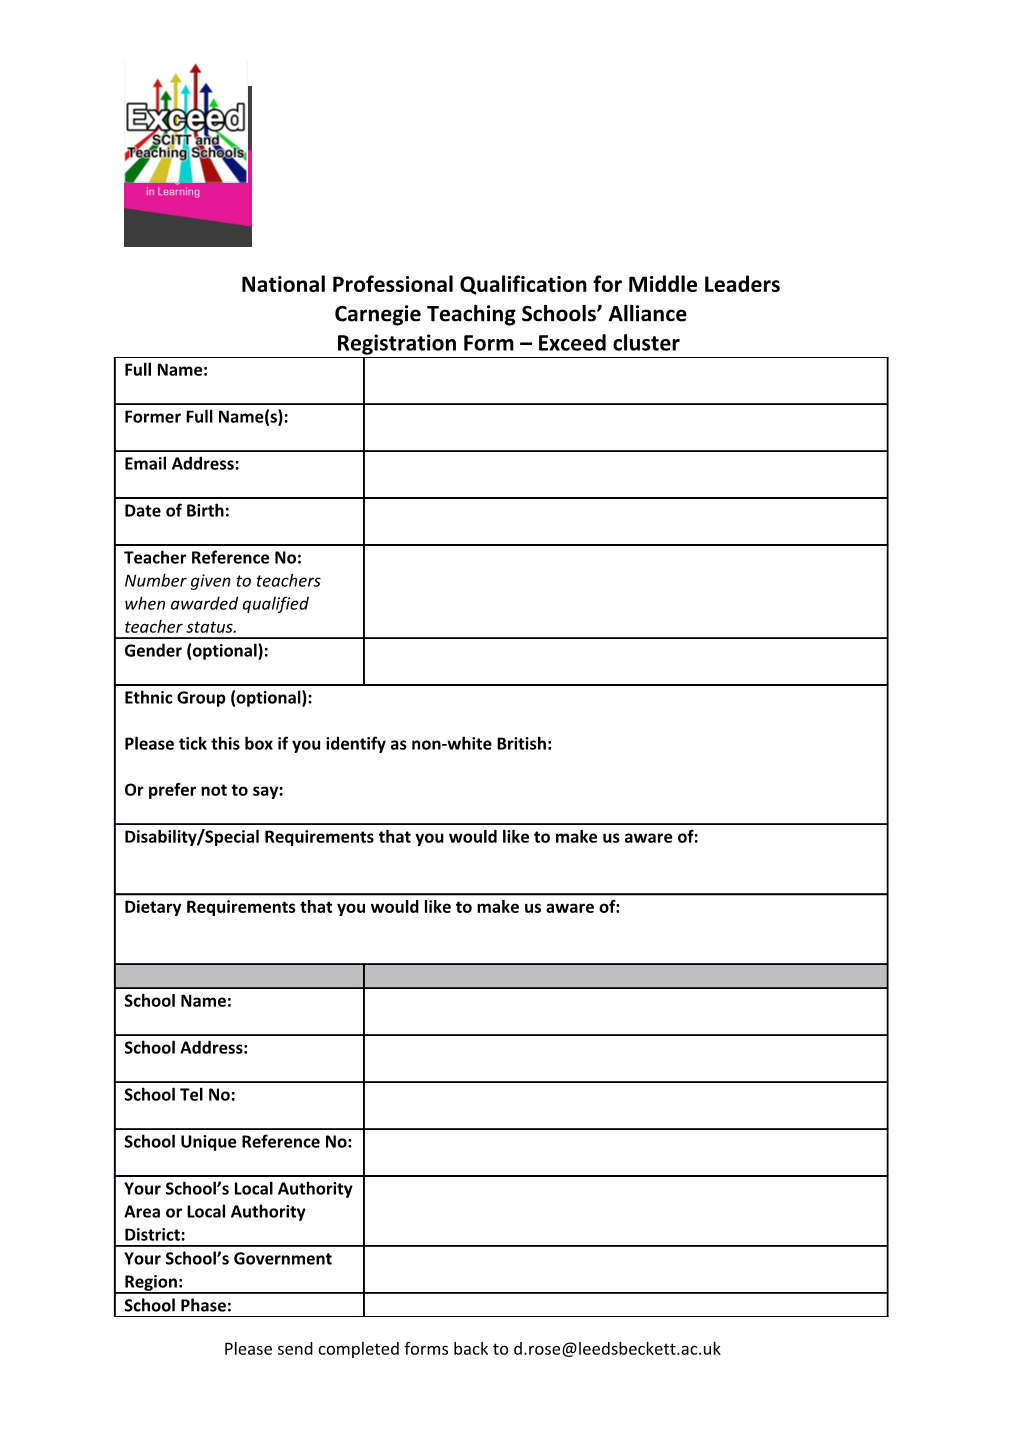 National Professional Qualification for Middle Leaders